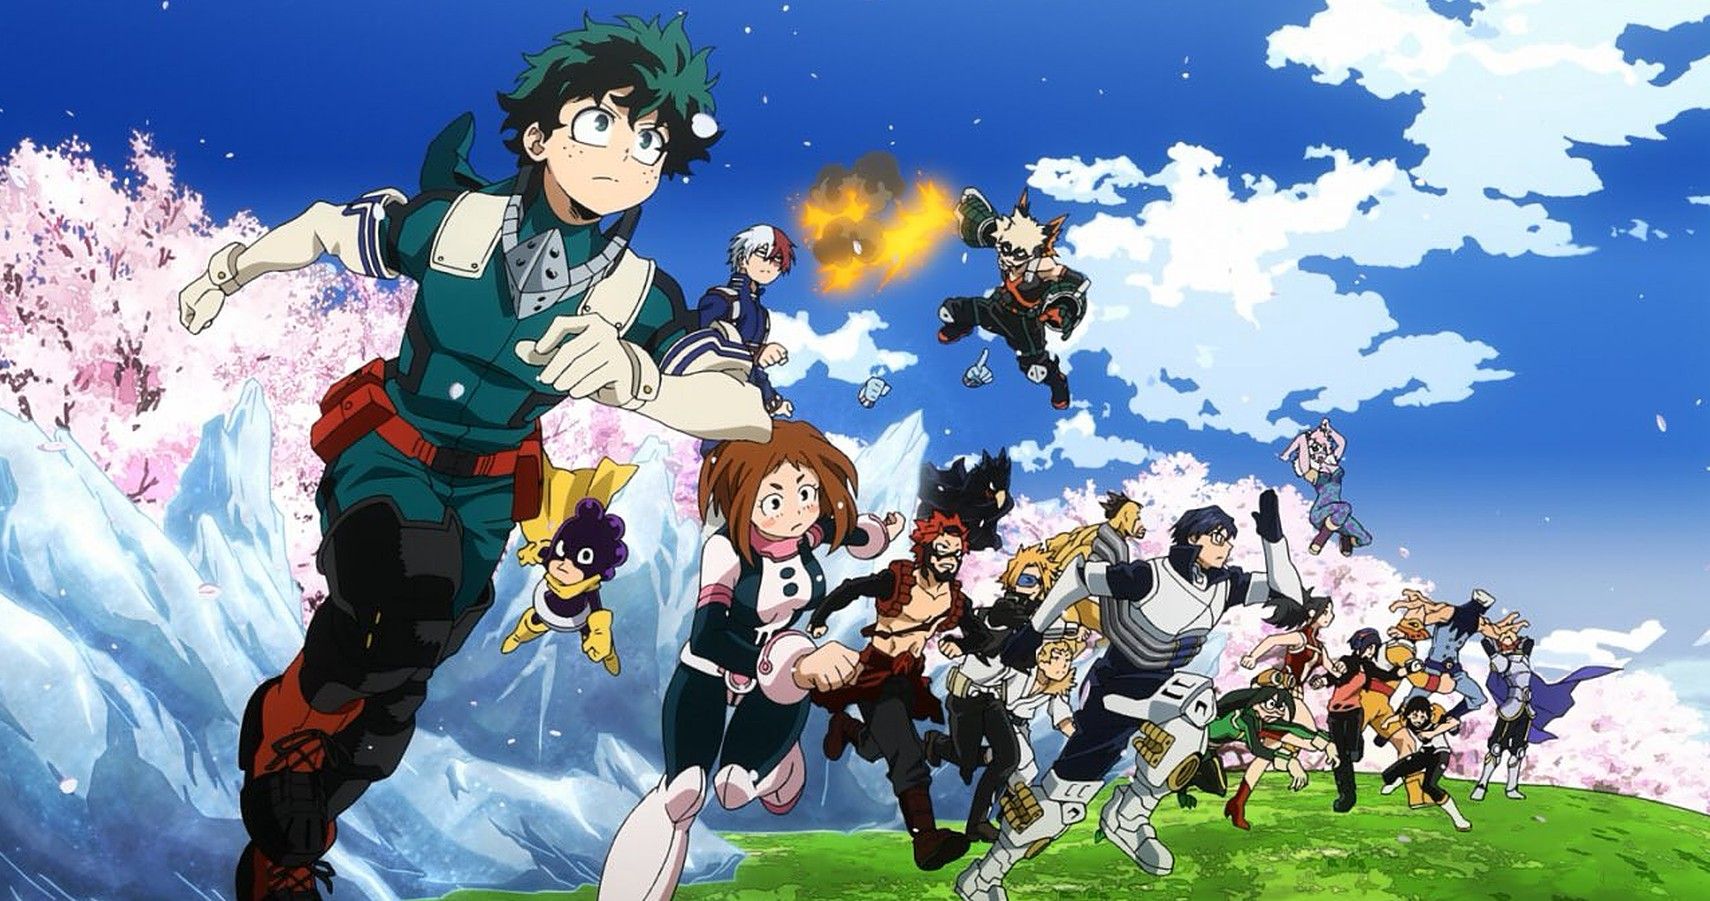 The Myers-Briggs® Types of the My Hero Academia Characters - Psychology  Junkie